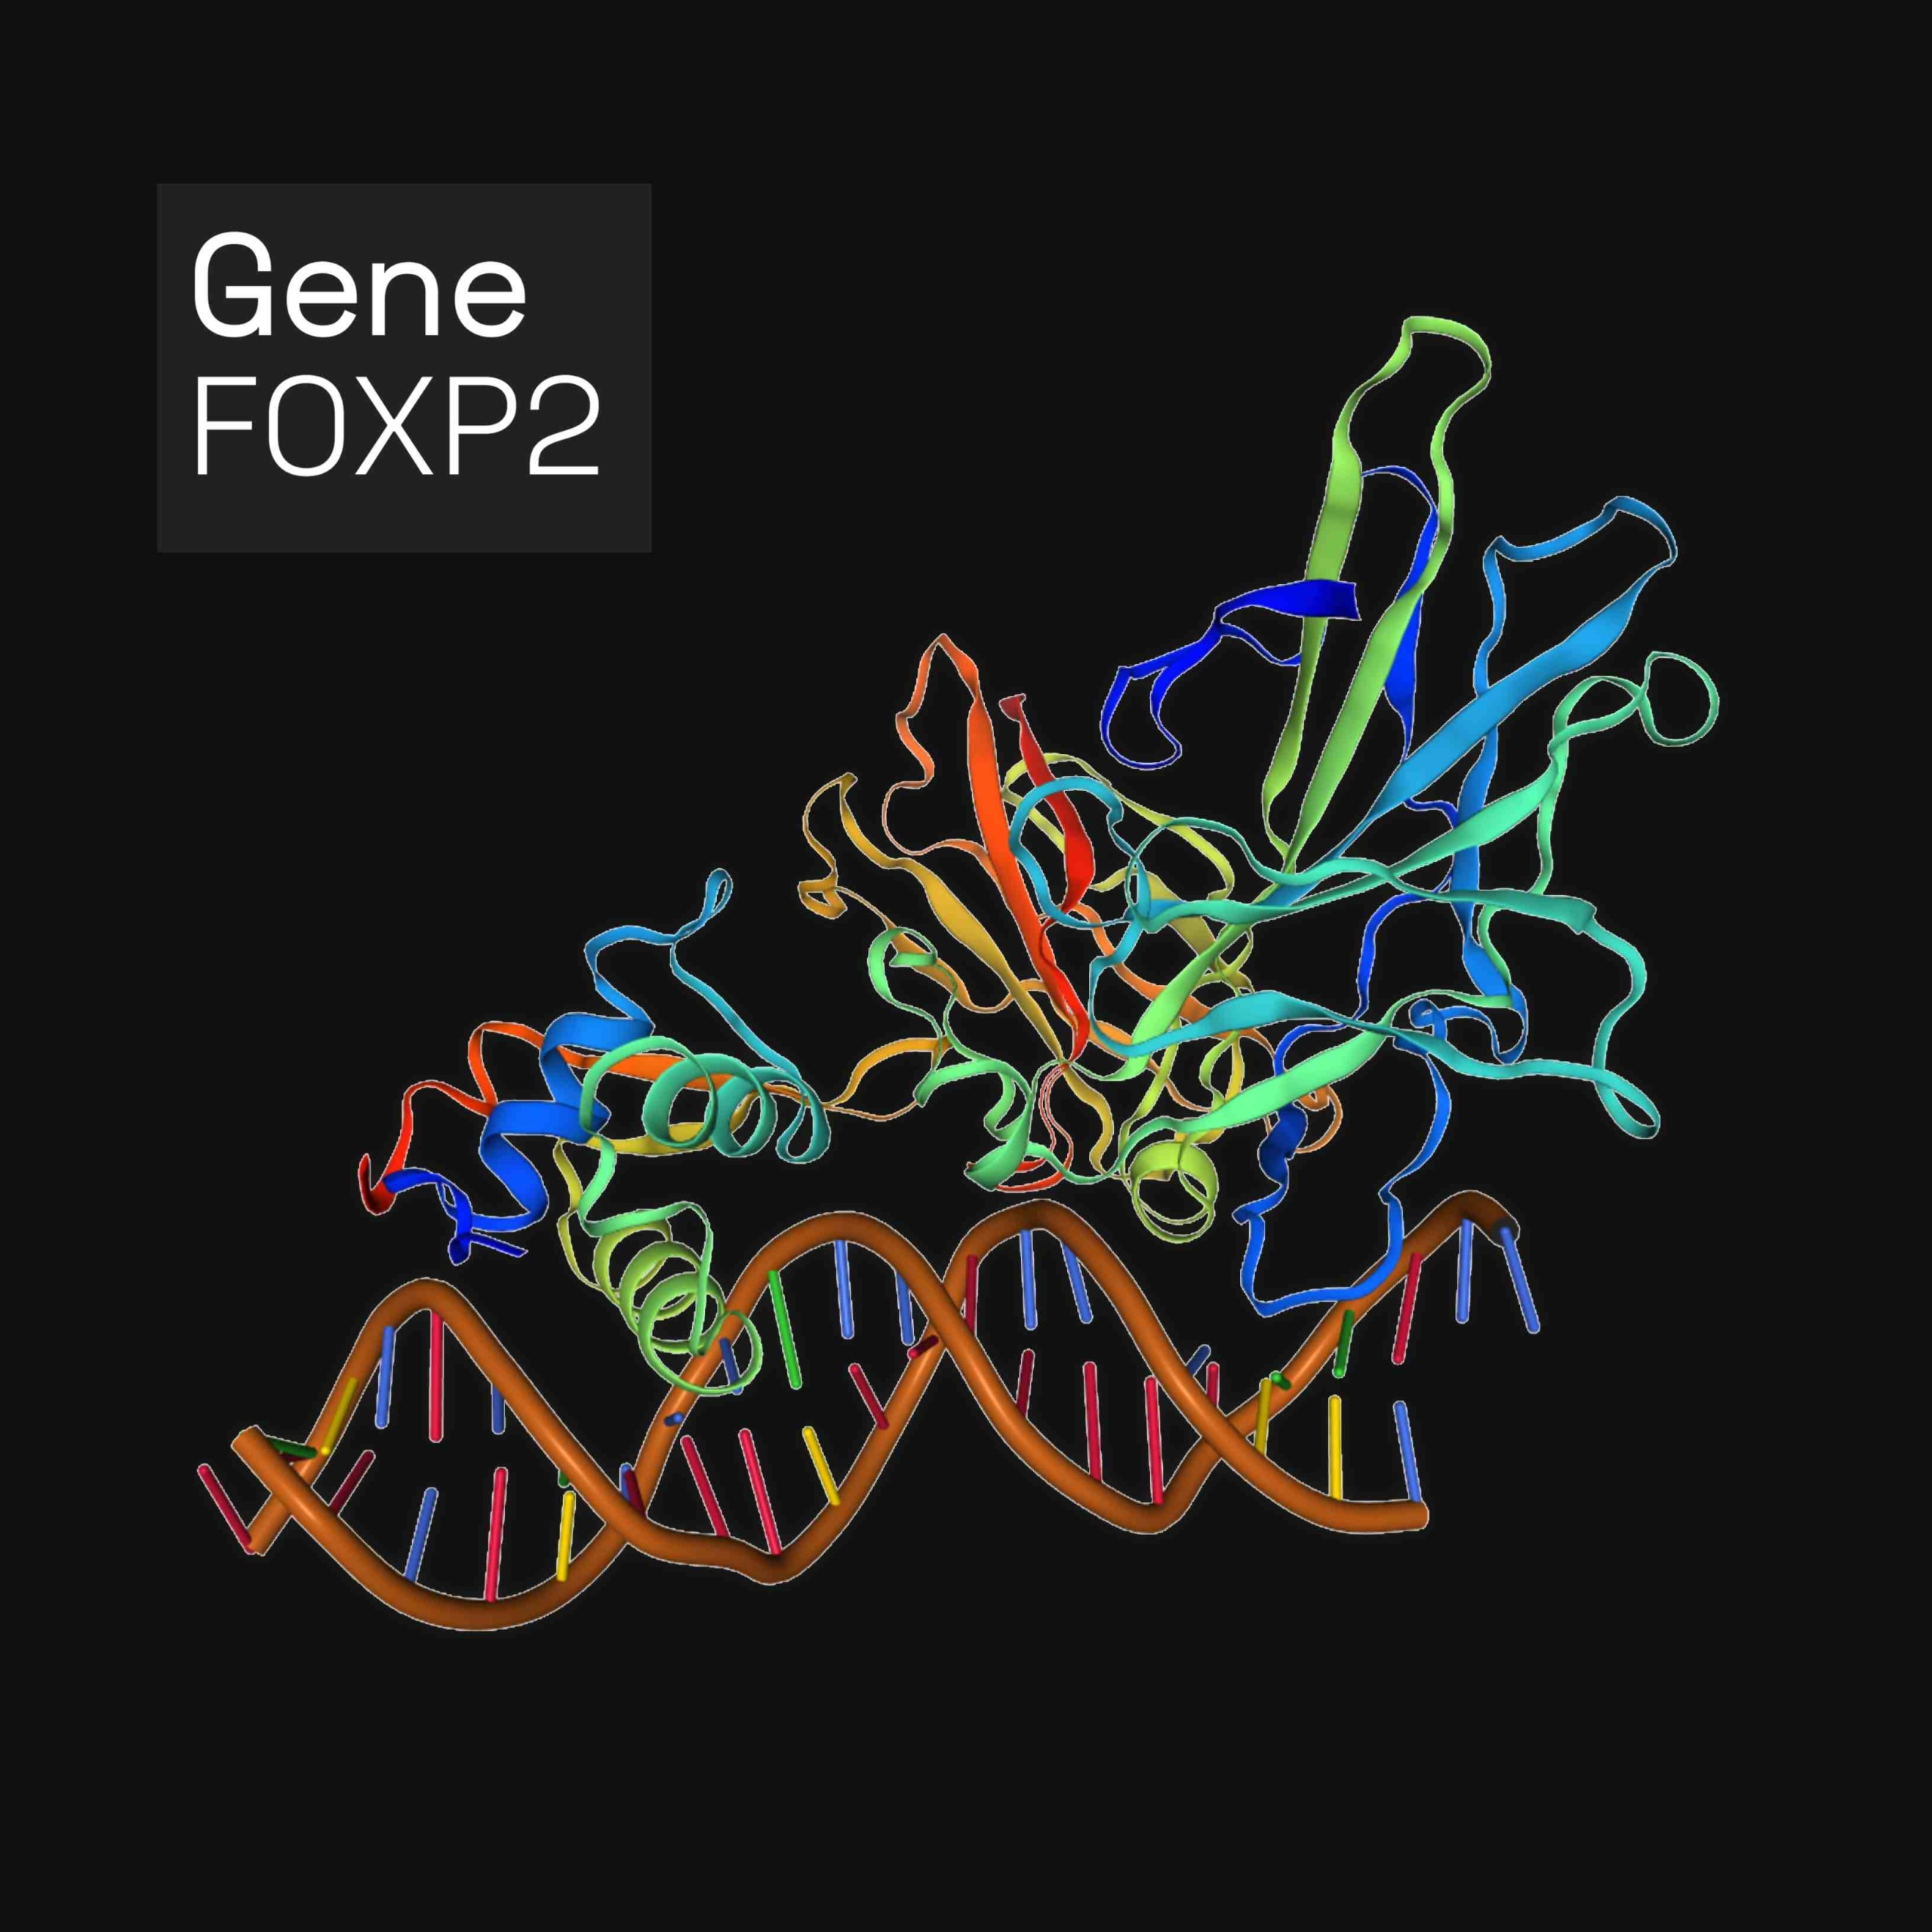 Forkhead box protein P2 (FOXP2) is a protein that, in humans, is encoded by the FOXP2 gene. FOXP2 is a member of the forkhead box family of transcription factors, proteins that regulate gene expression by binding to DNA. It is expressed in the brain, heart, lungs and digestive system.